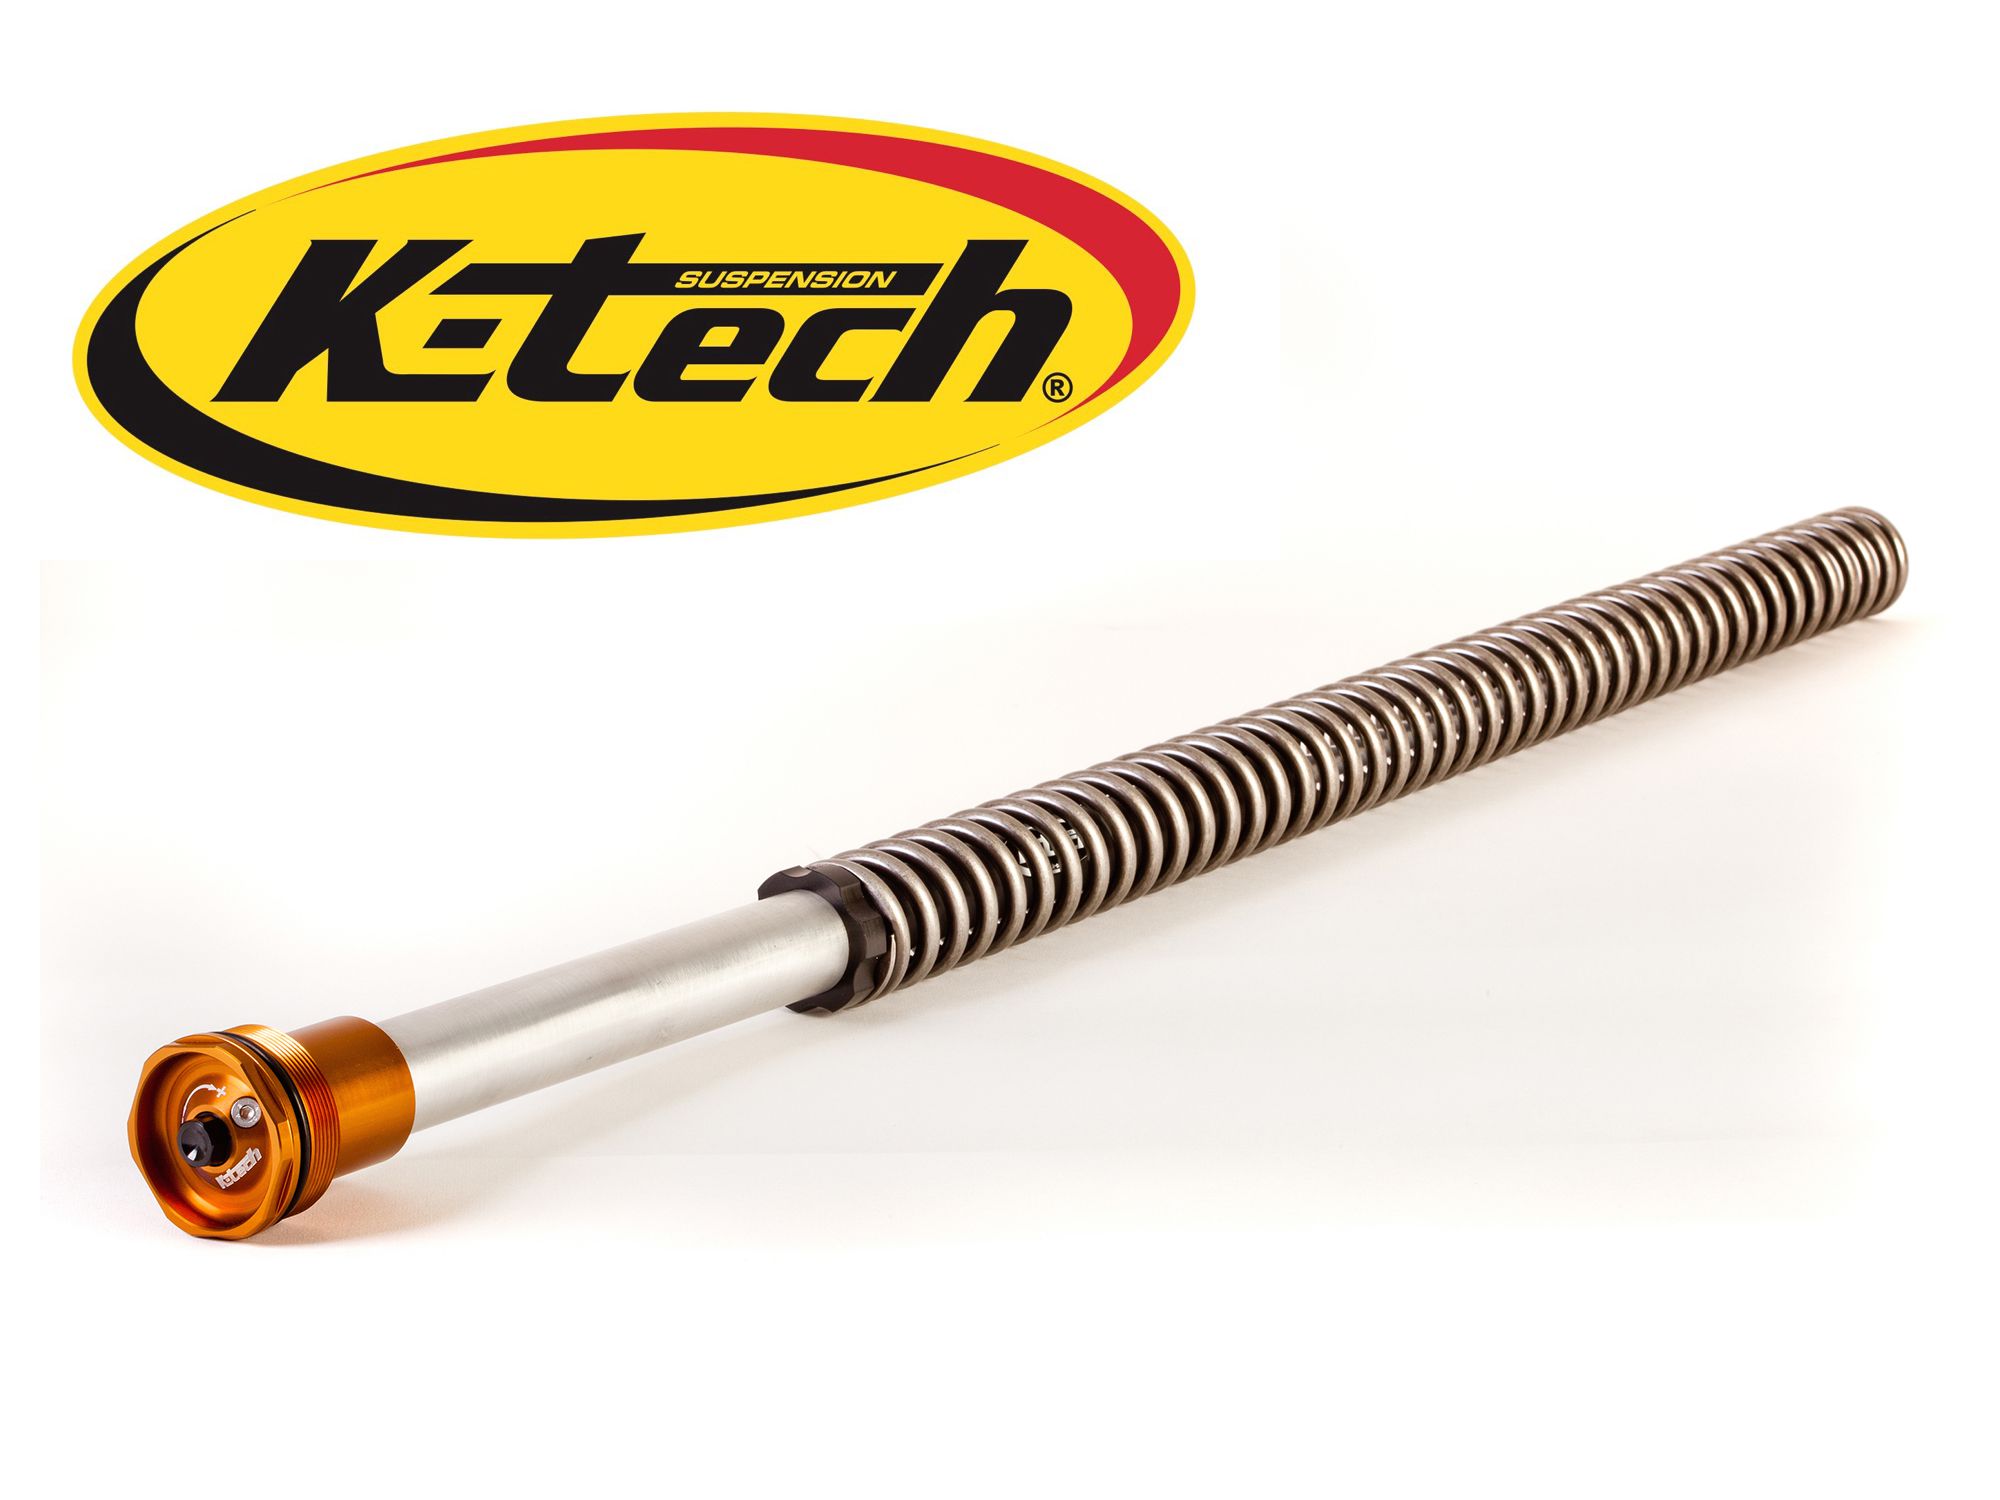 K-Tech Suspension Off Road Spring System - New Product | Cycle World